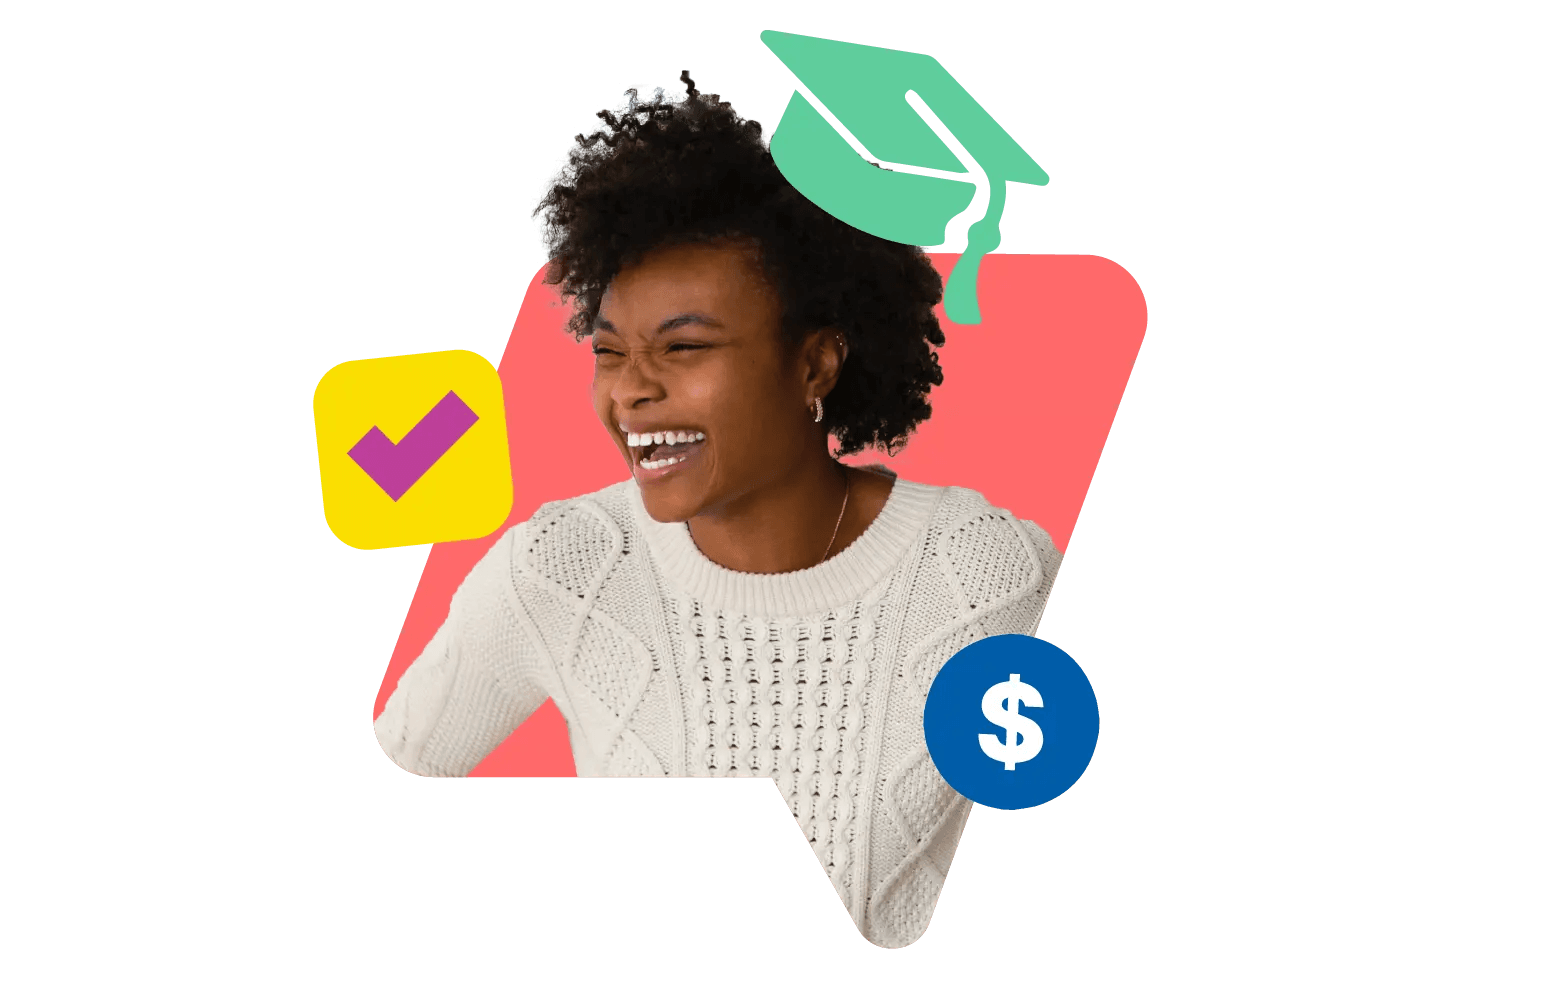 Young woman with an illustrated grad cap and a checkmark and money icon